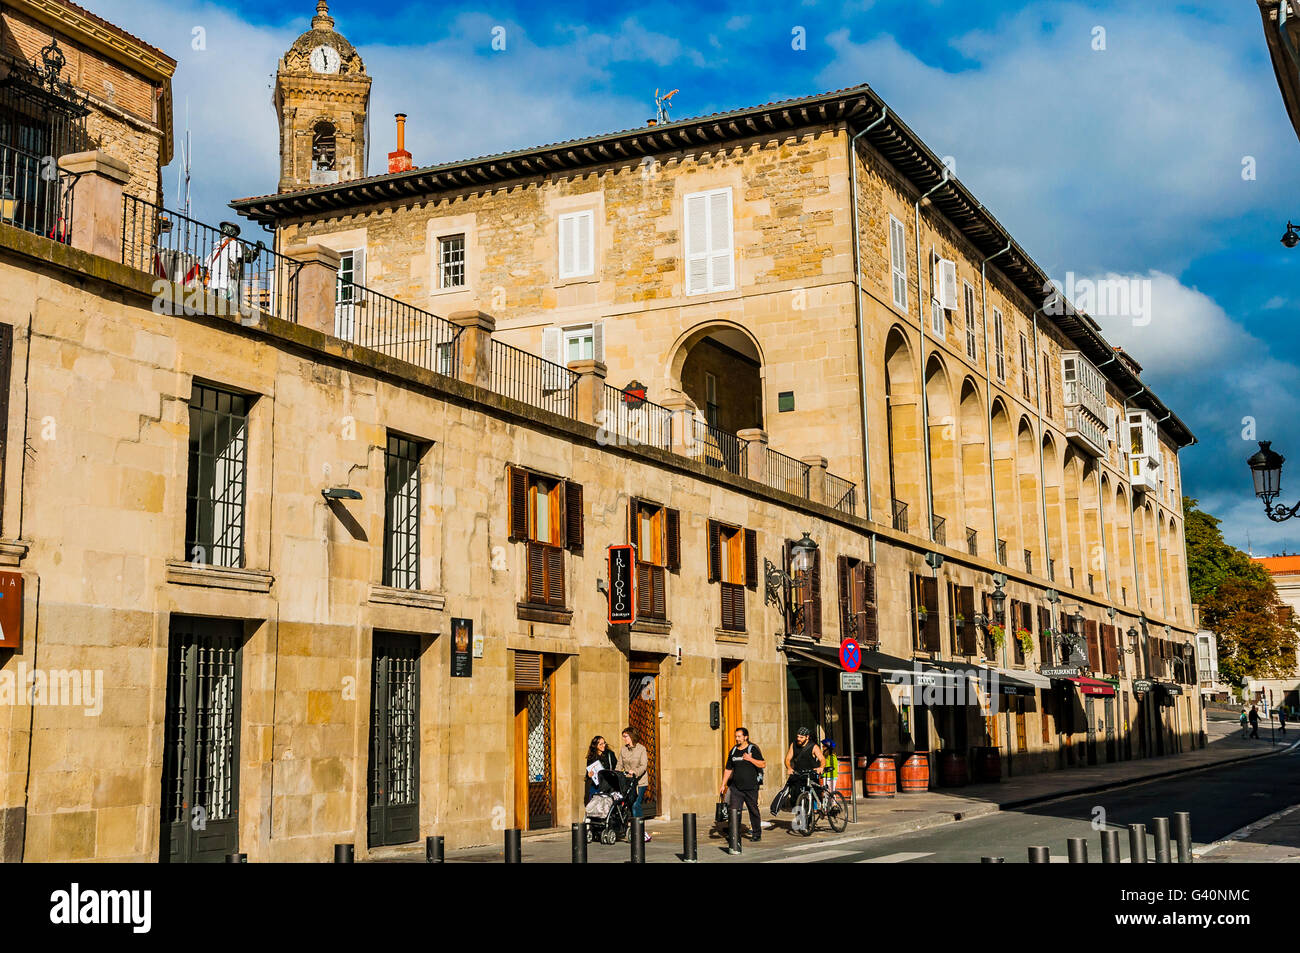 Los Arquillos house. Traditional architecture in Old Town. Vitoria-Gasteiz, Álava, Basque Country, Spain, Europe Stock Photo